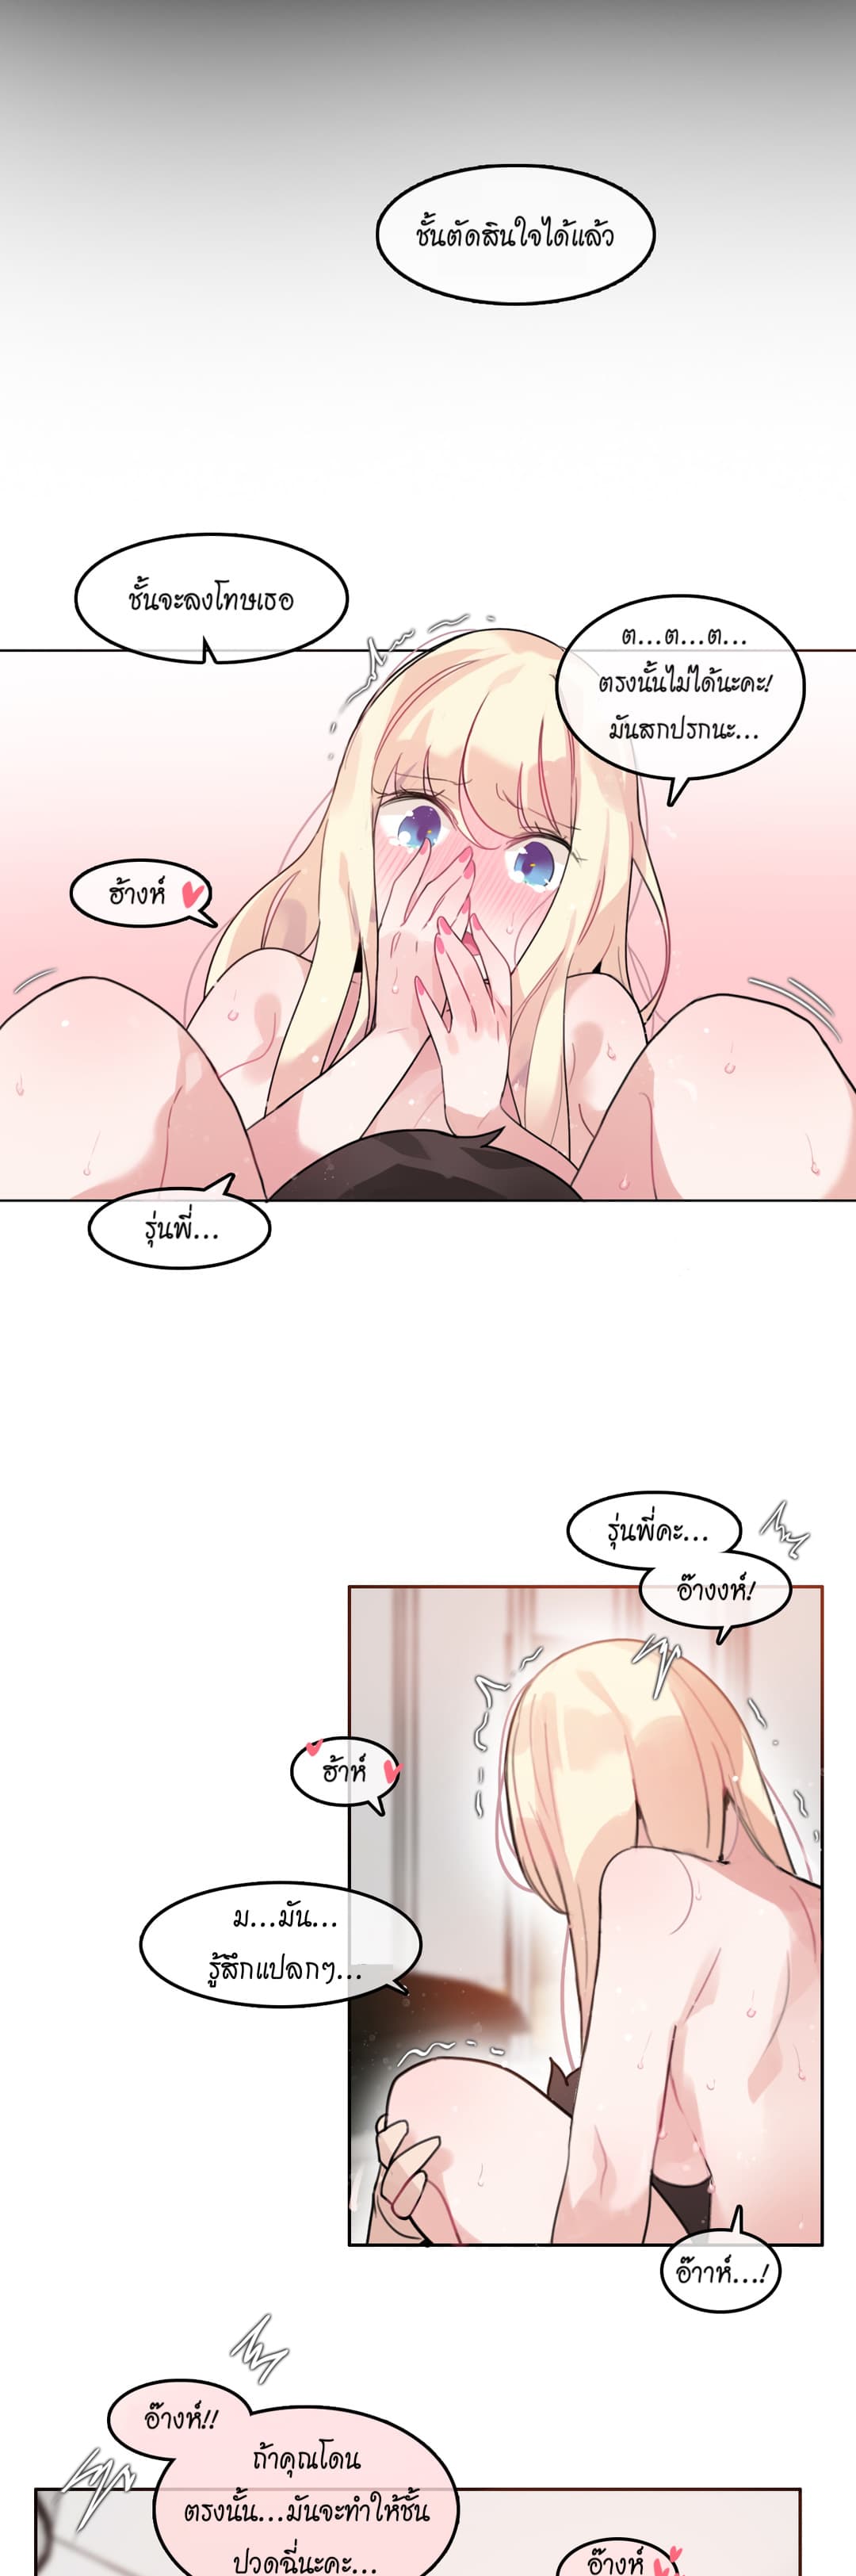 A Pervert’s Daily Life 34 (21)